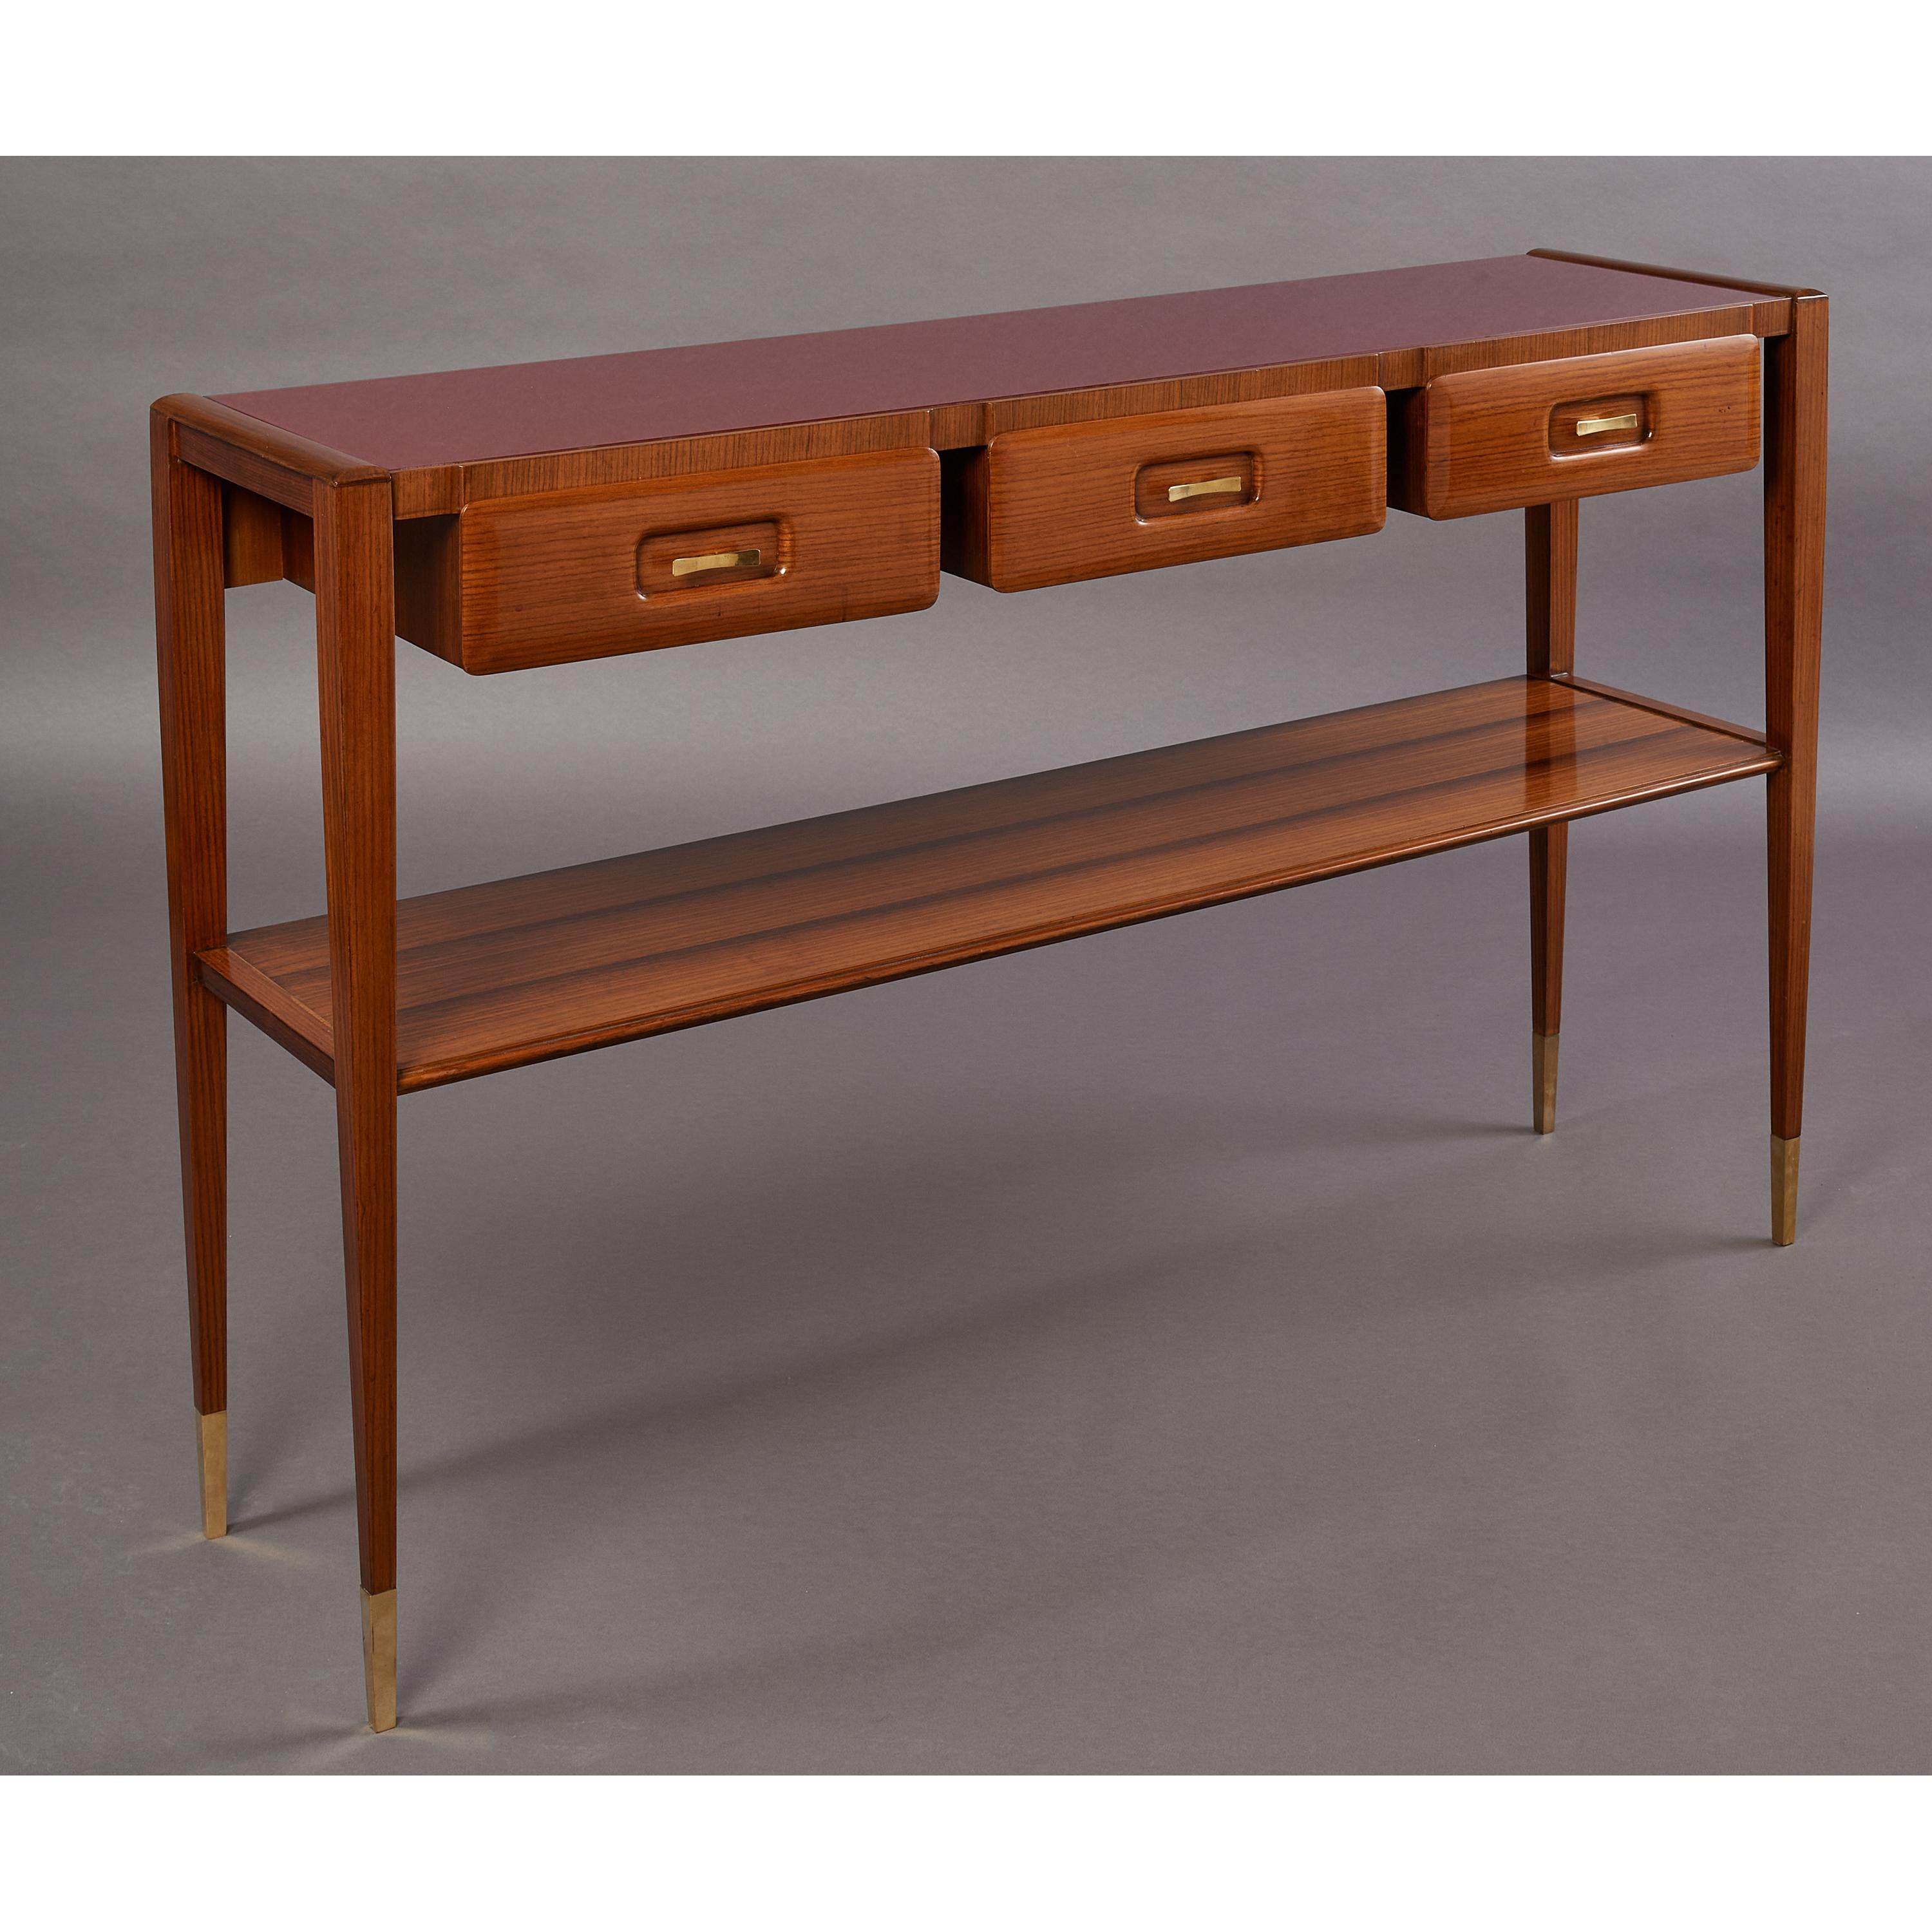 ITALY 1950's, in the manner of Gio Ponti
A slim, elegantly proportioned console table with beautifully grained light woods, three drawers with carved insets and sculpted brass handles, one elegantly veneered lower shelf, tapered legs ending in